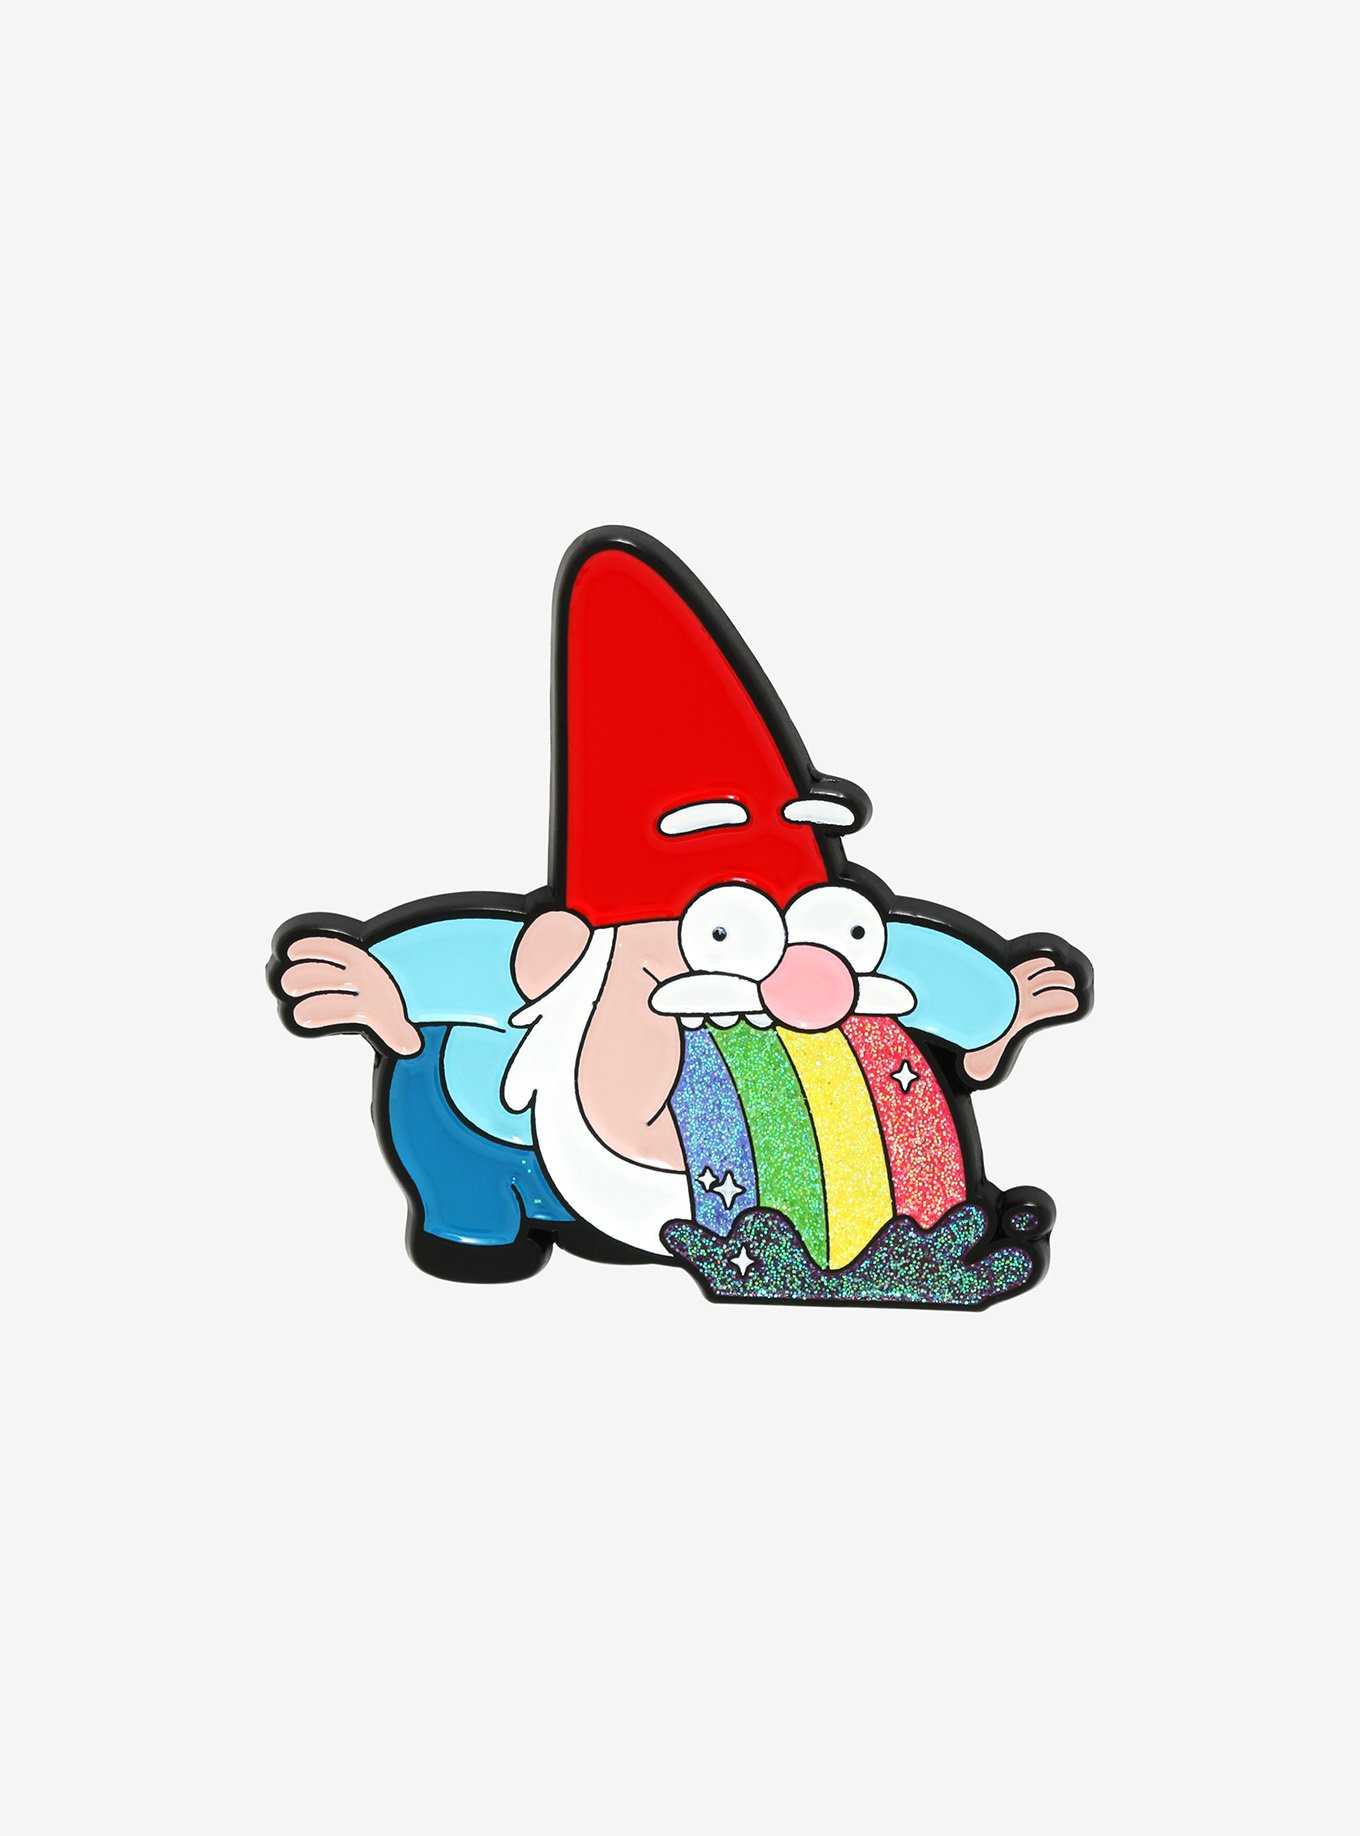 Gravity Falls Steve the Gnome Enamel Pin - BoxLunch Exclusive, , hi-res